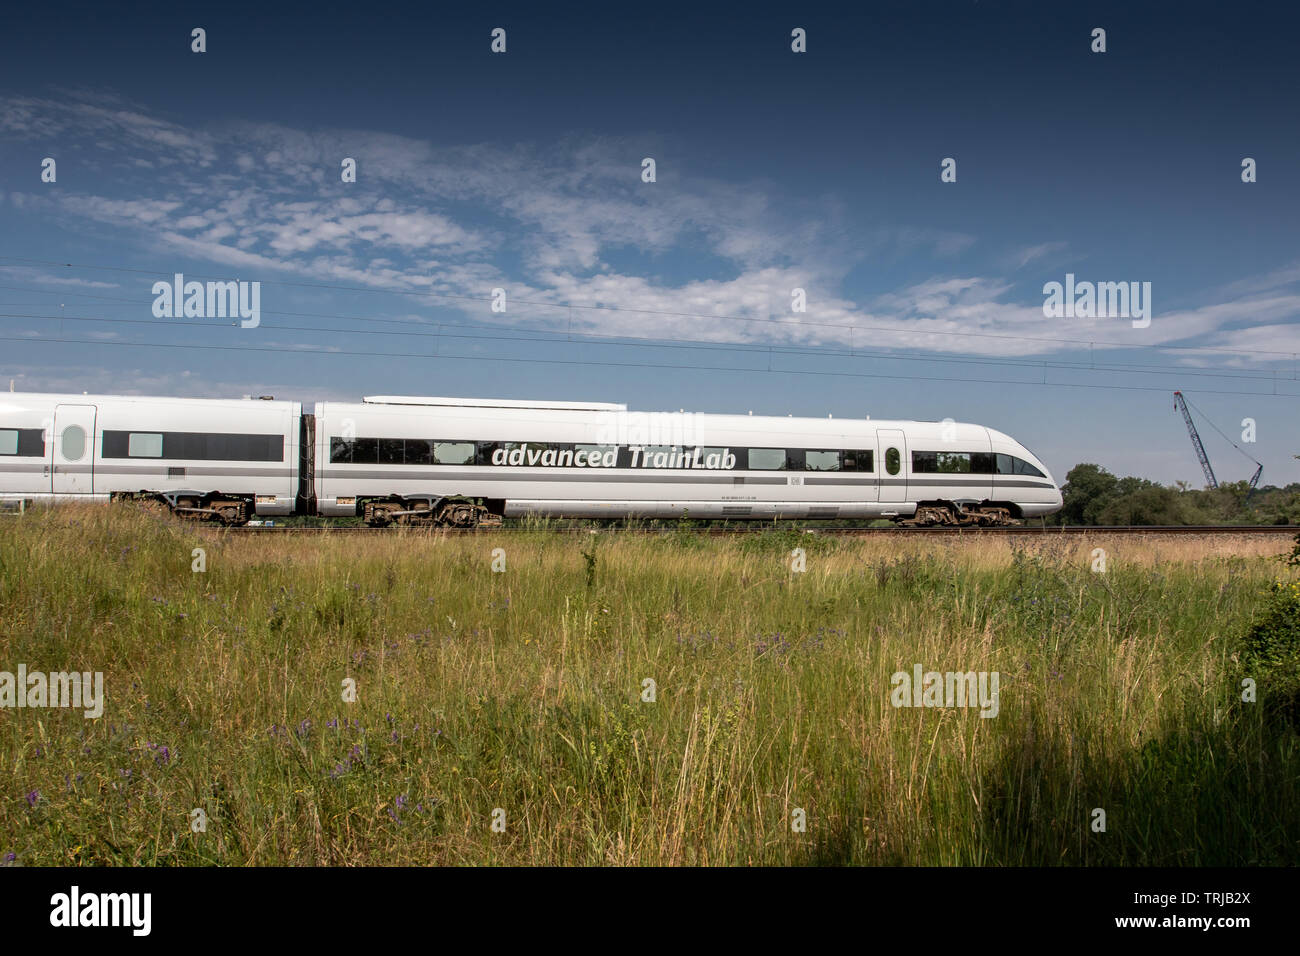 Dessau-Roßlau, Germany, June 5, 2019 - In June 2019, the Advanced TrainLab, a special test train based on a diesel-powered ICE train operated by Deutsche Bahn, is on its way to Berlin. There, the vehicle will do some test drives in driverless operation. This train can be used for a wide variety of experiments, including in the area of the 5G radio network. Stock Photo